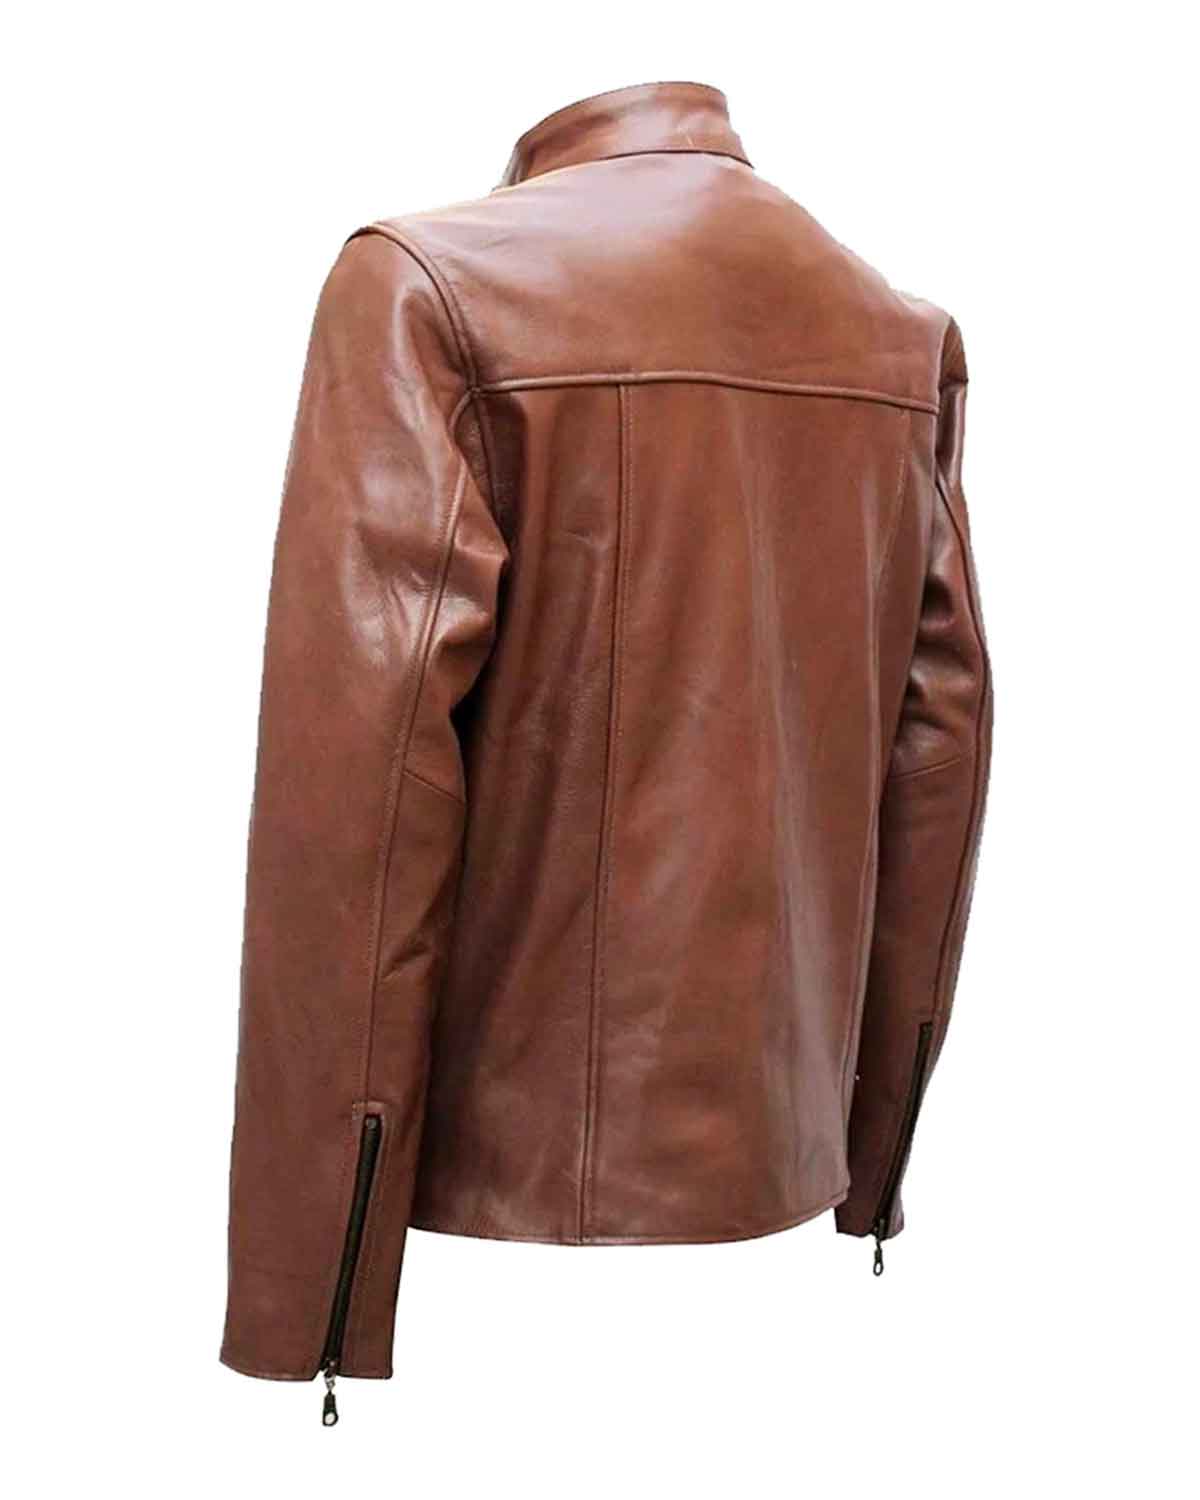 Mens Classic Brown Biker Style Leather Jacket